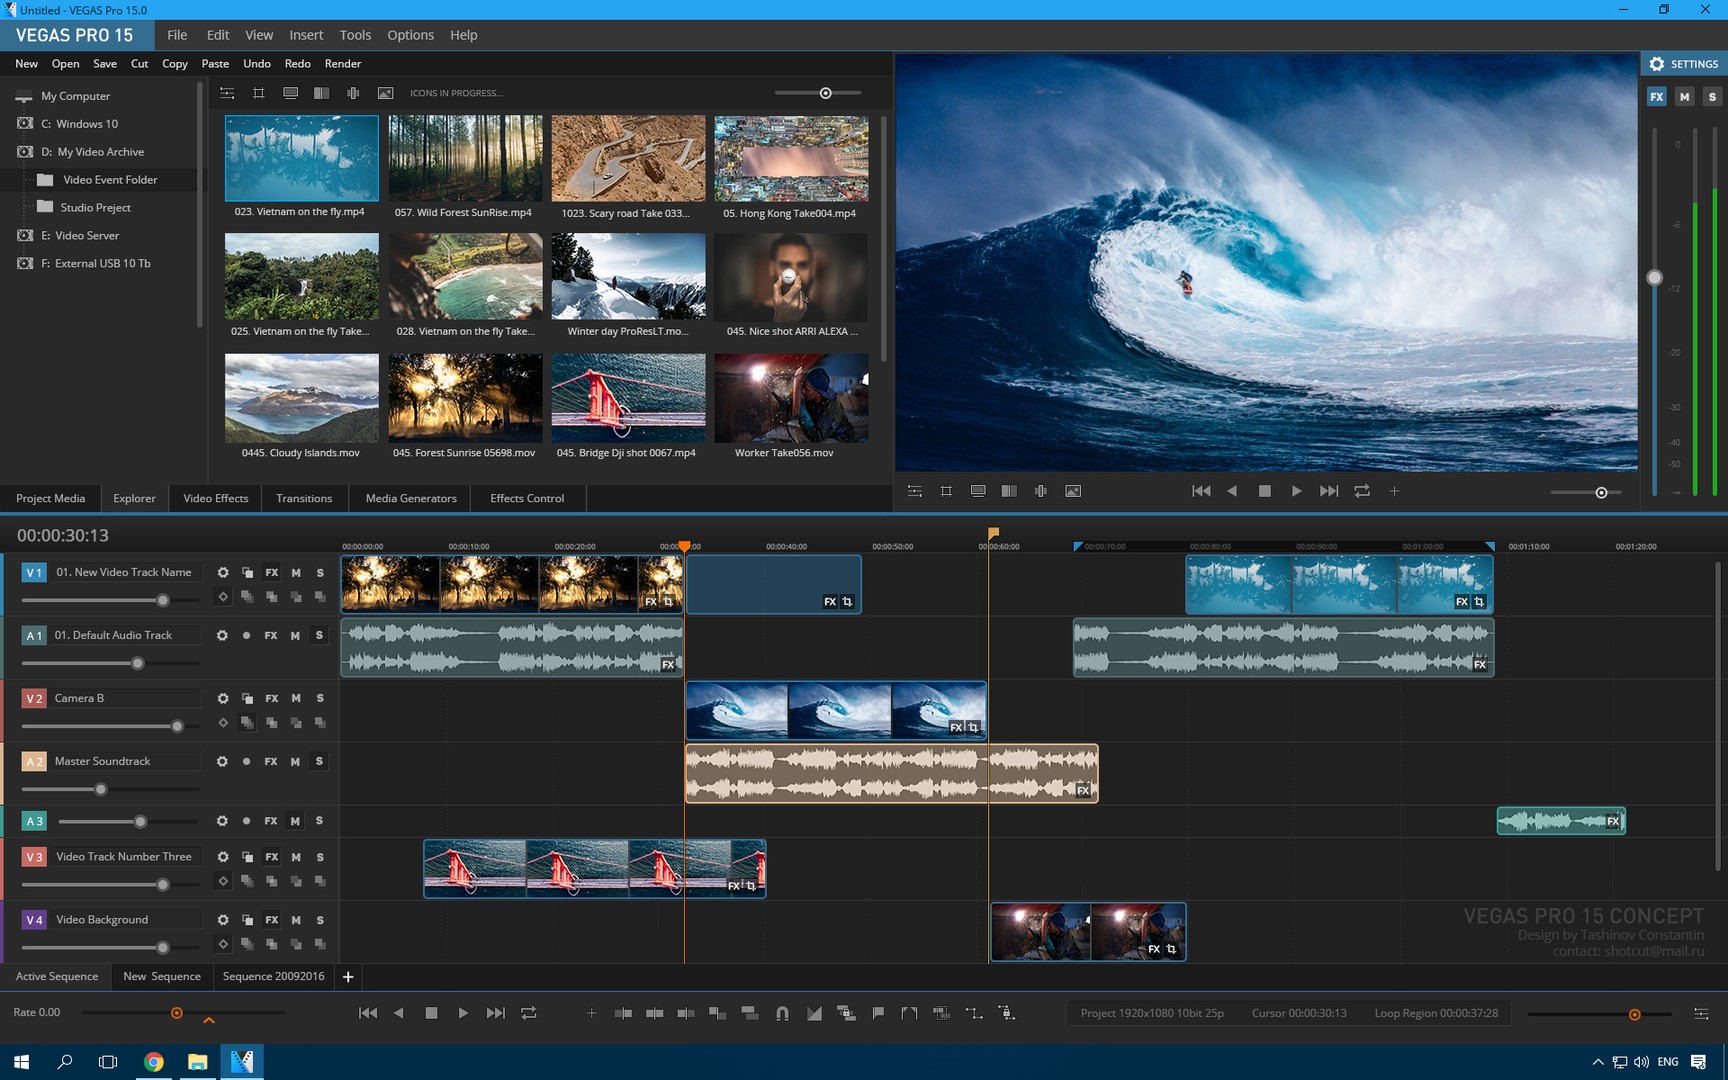 sony vegas pro video editing software free download